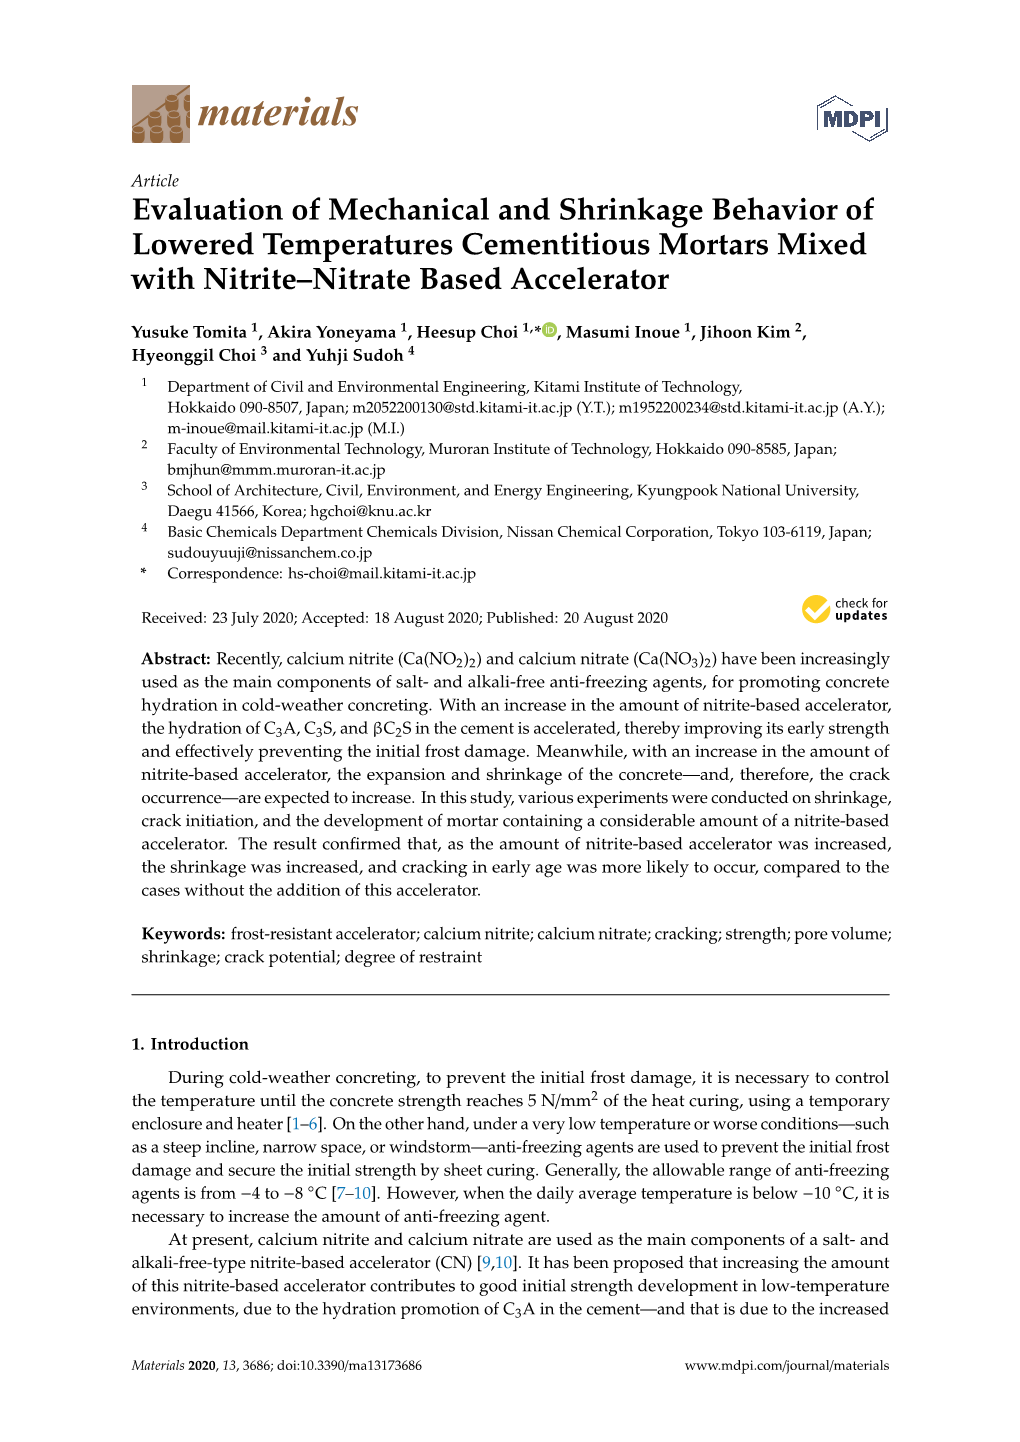 Evaluation of Mechanical and Shrinkage Behavior of Lowered Temperatures Cementitious Mortars Mixed with Nitrite–Nitrate Based Accelerator